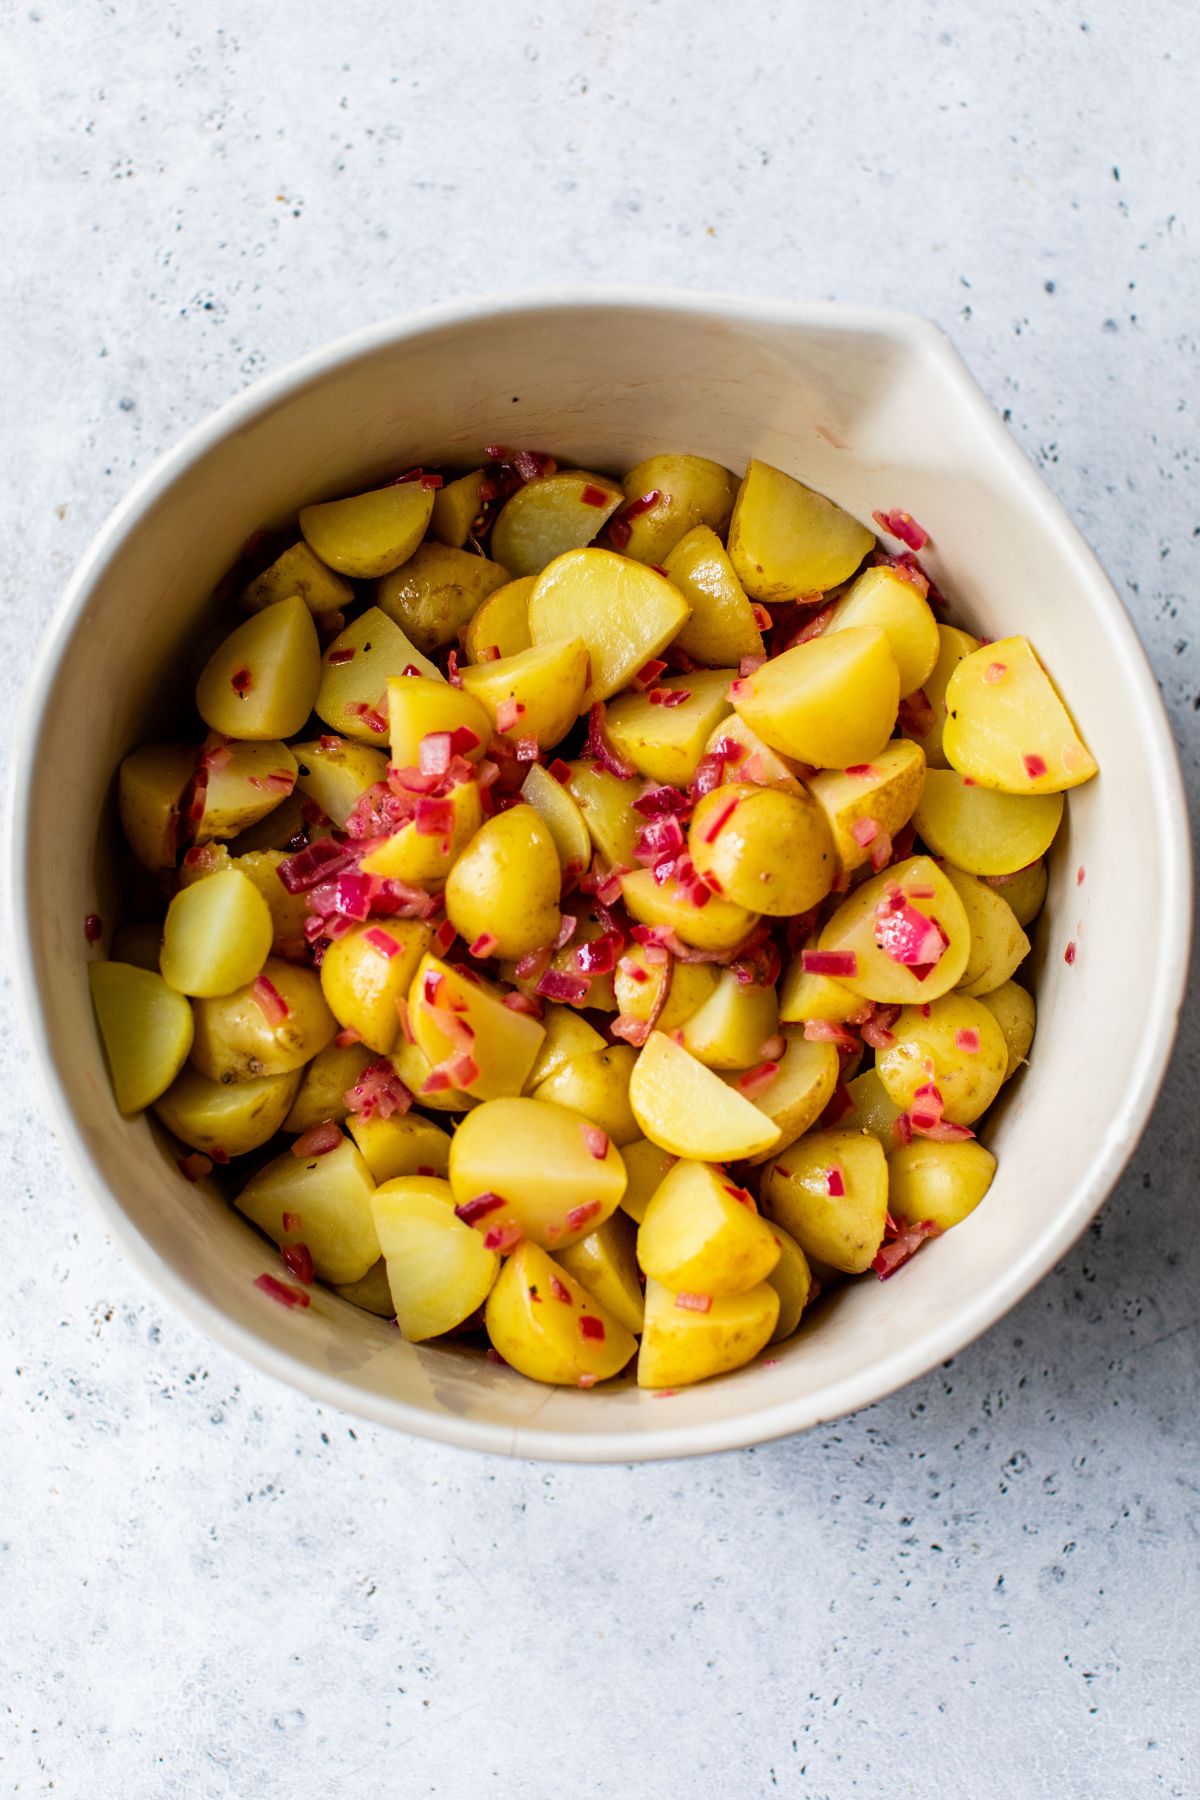 Combining dressing with cooked red potatoes.